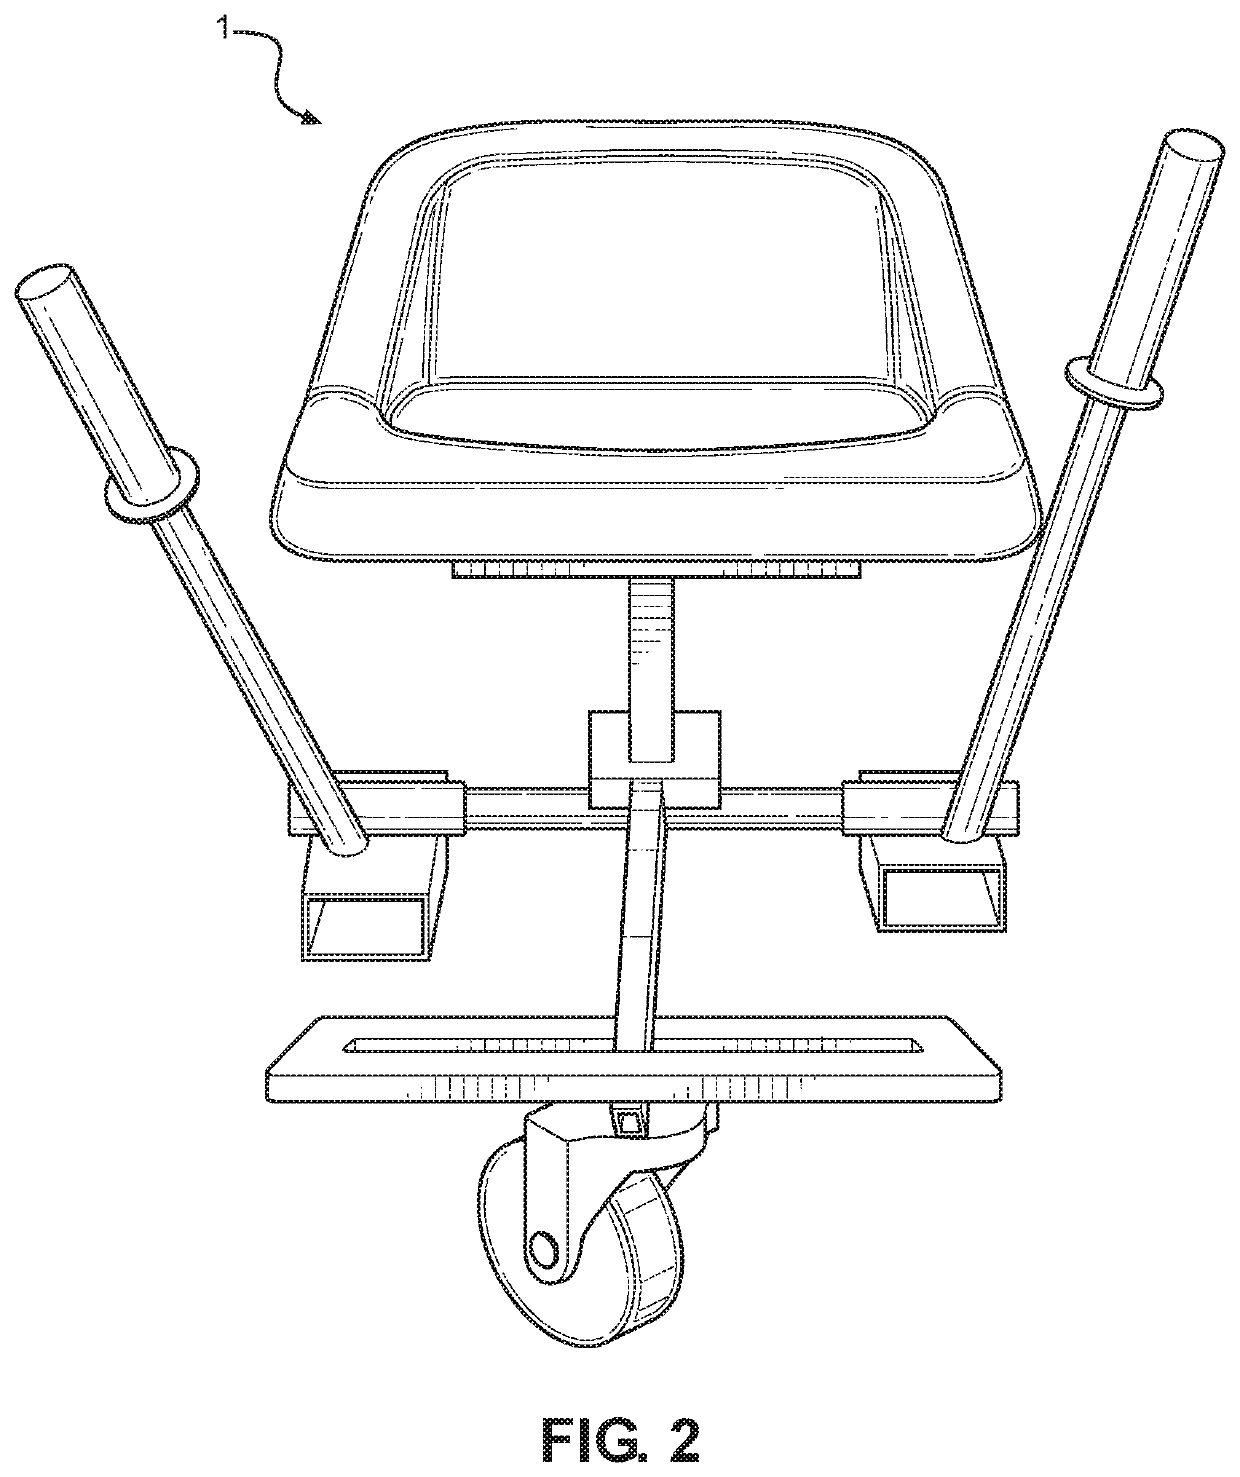 Wheelchair frame assembly